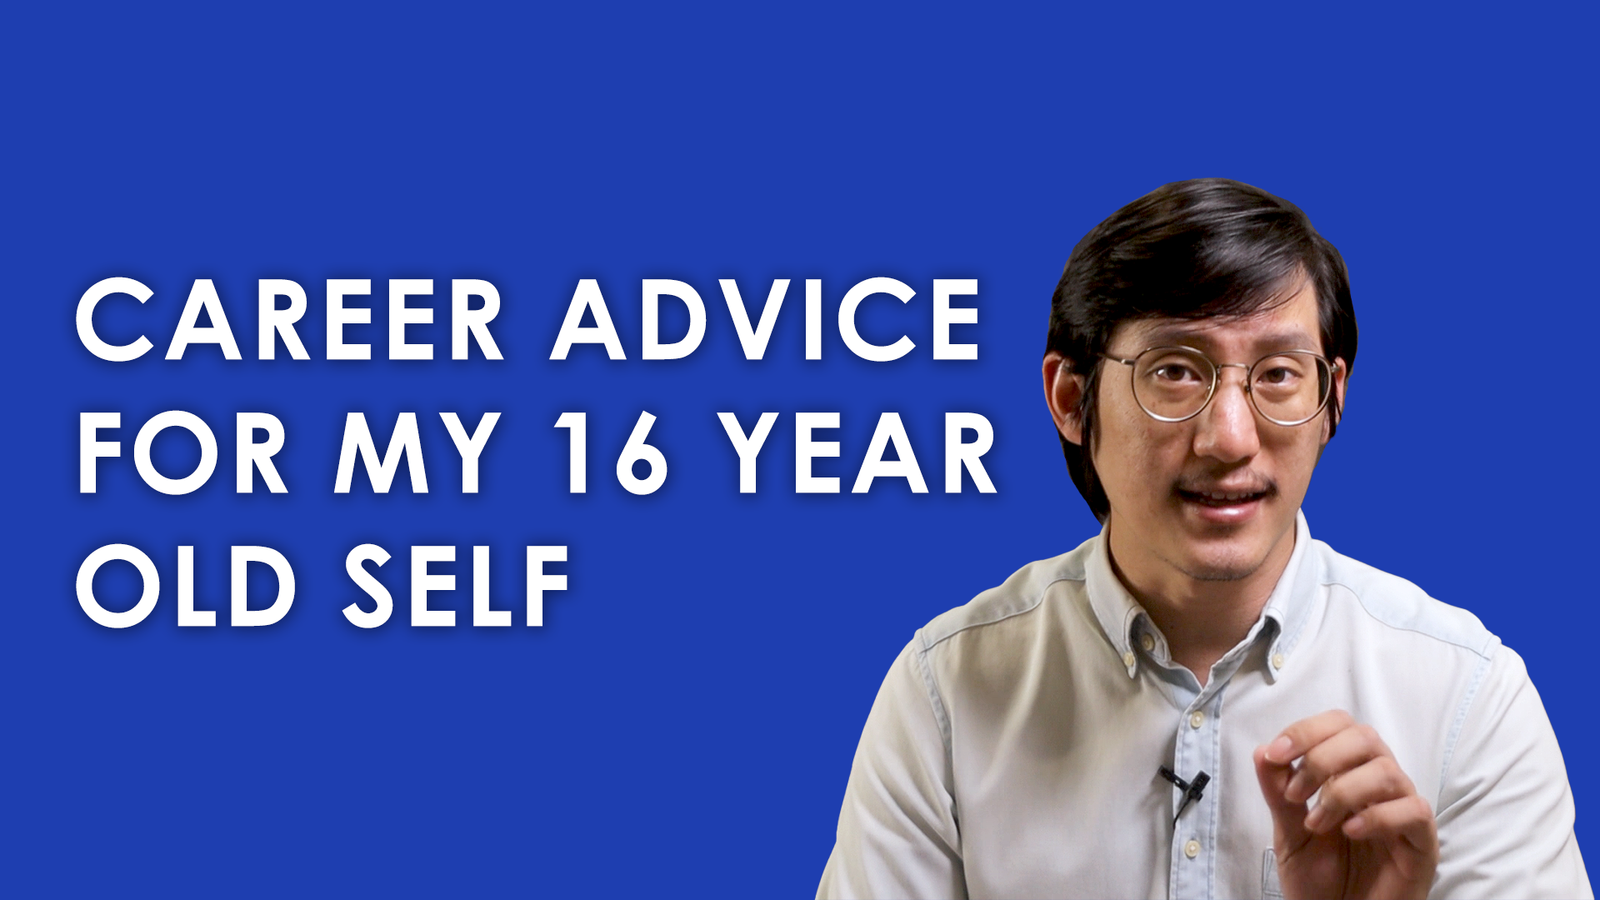 3 Pieces of Advice for my 16 Year Old Self